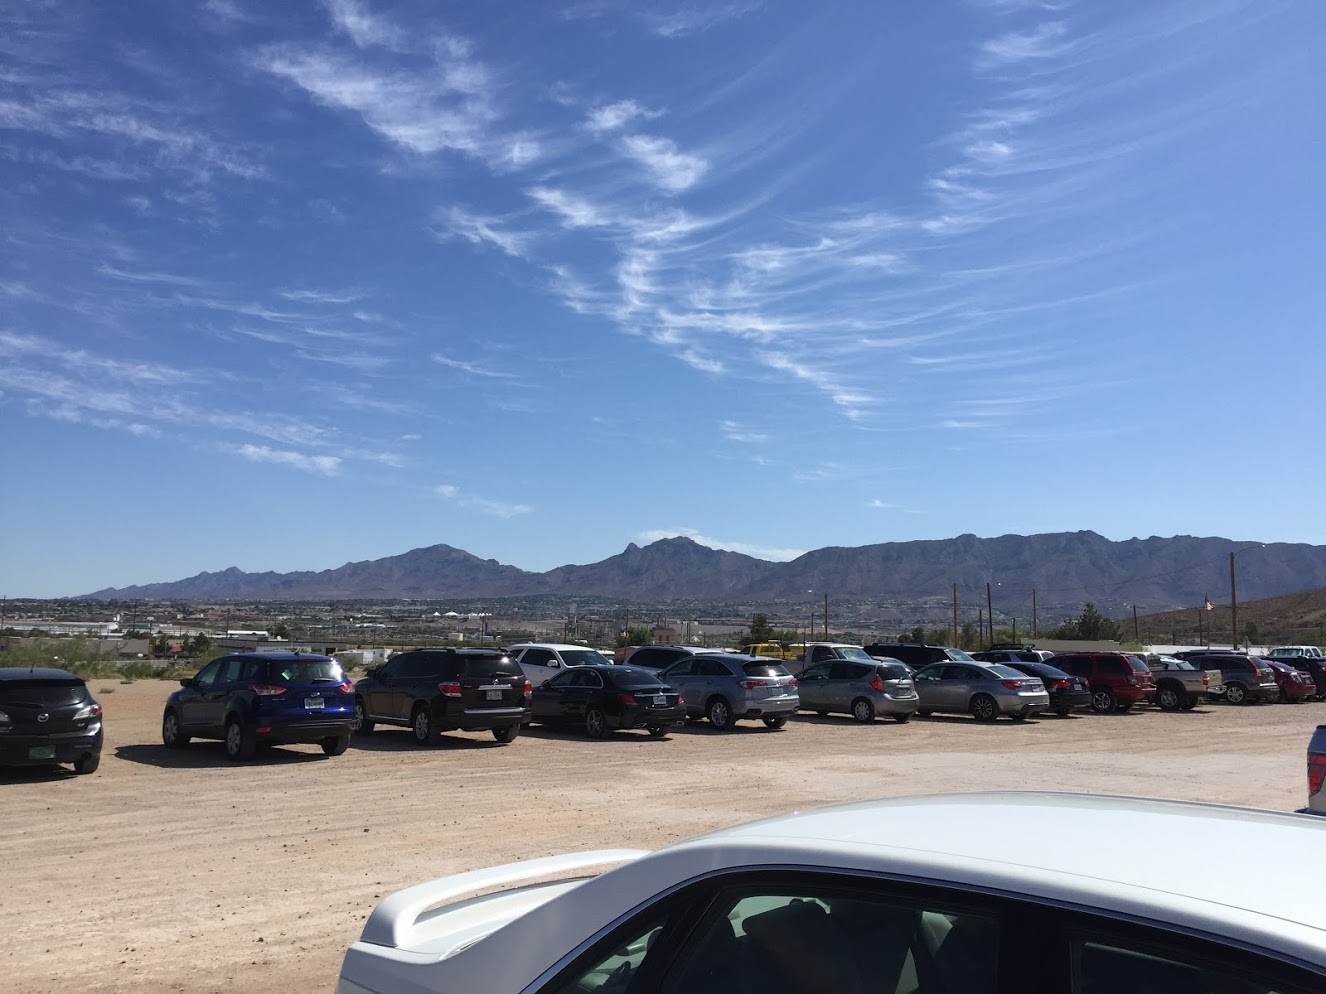 The North Franklin Mountain is visible from the parking lot of Ardovino's Desert Crossing.